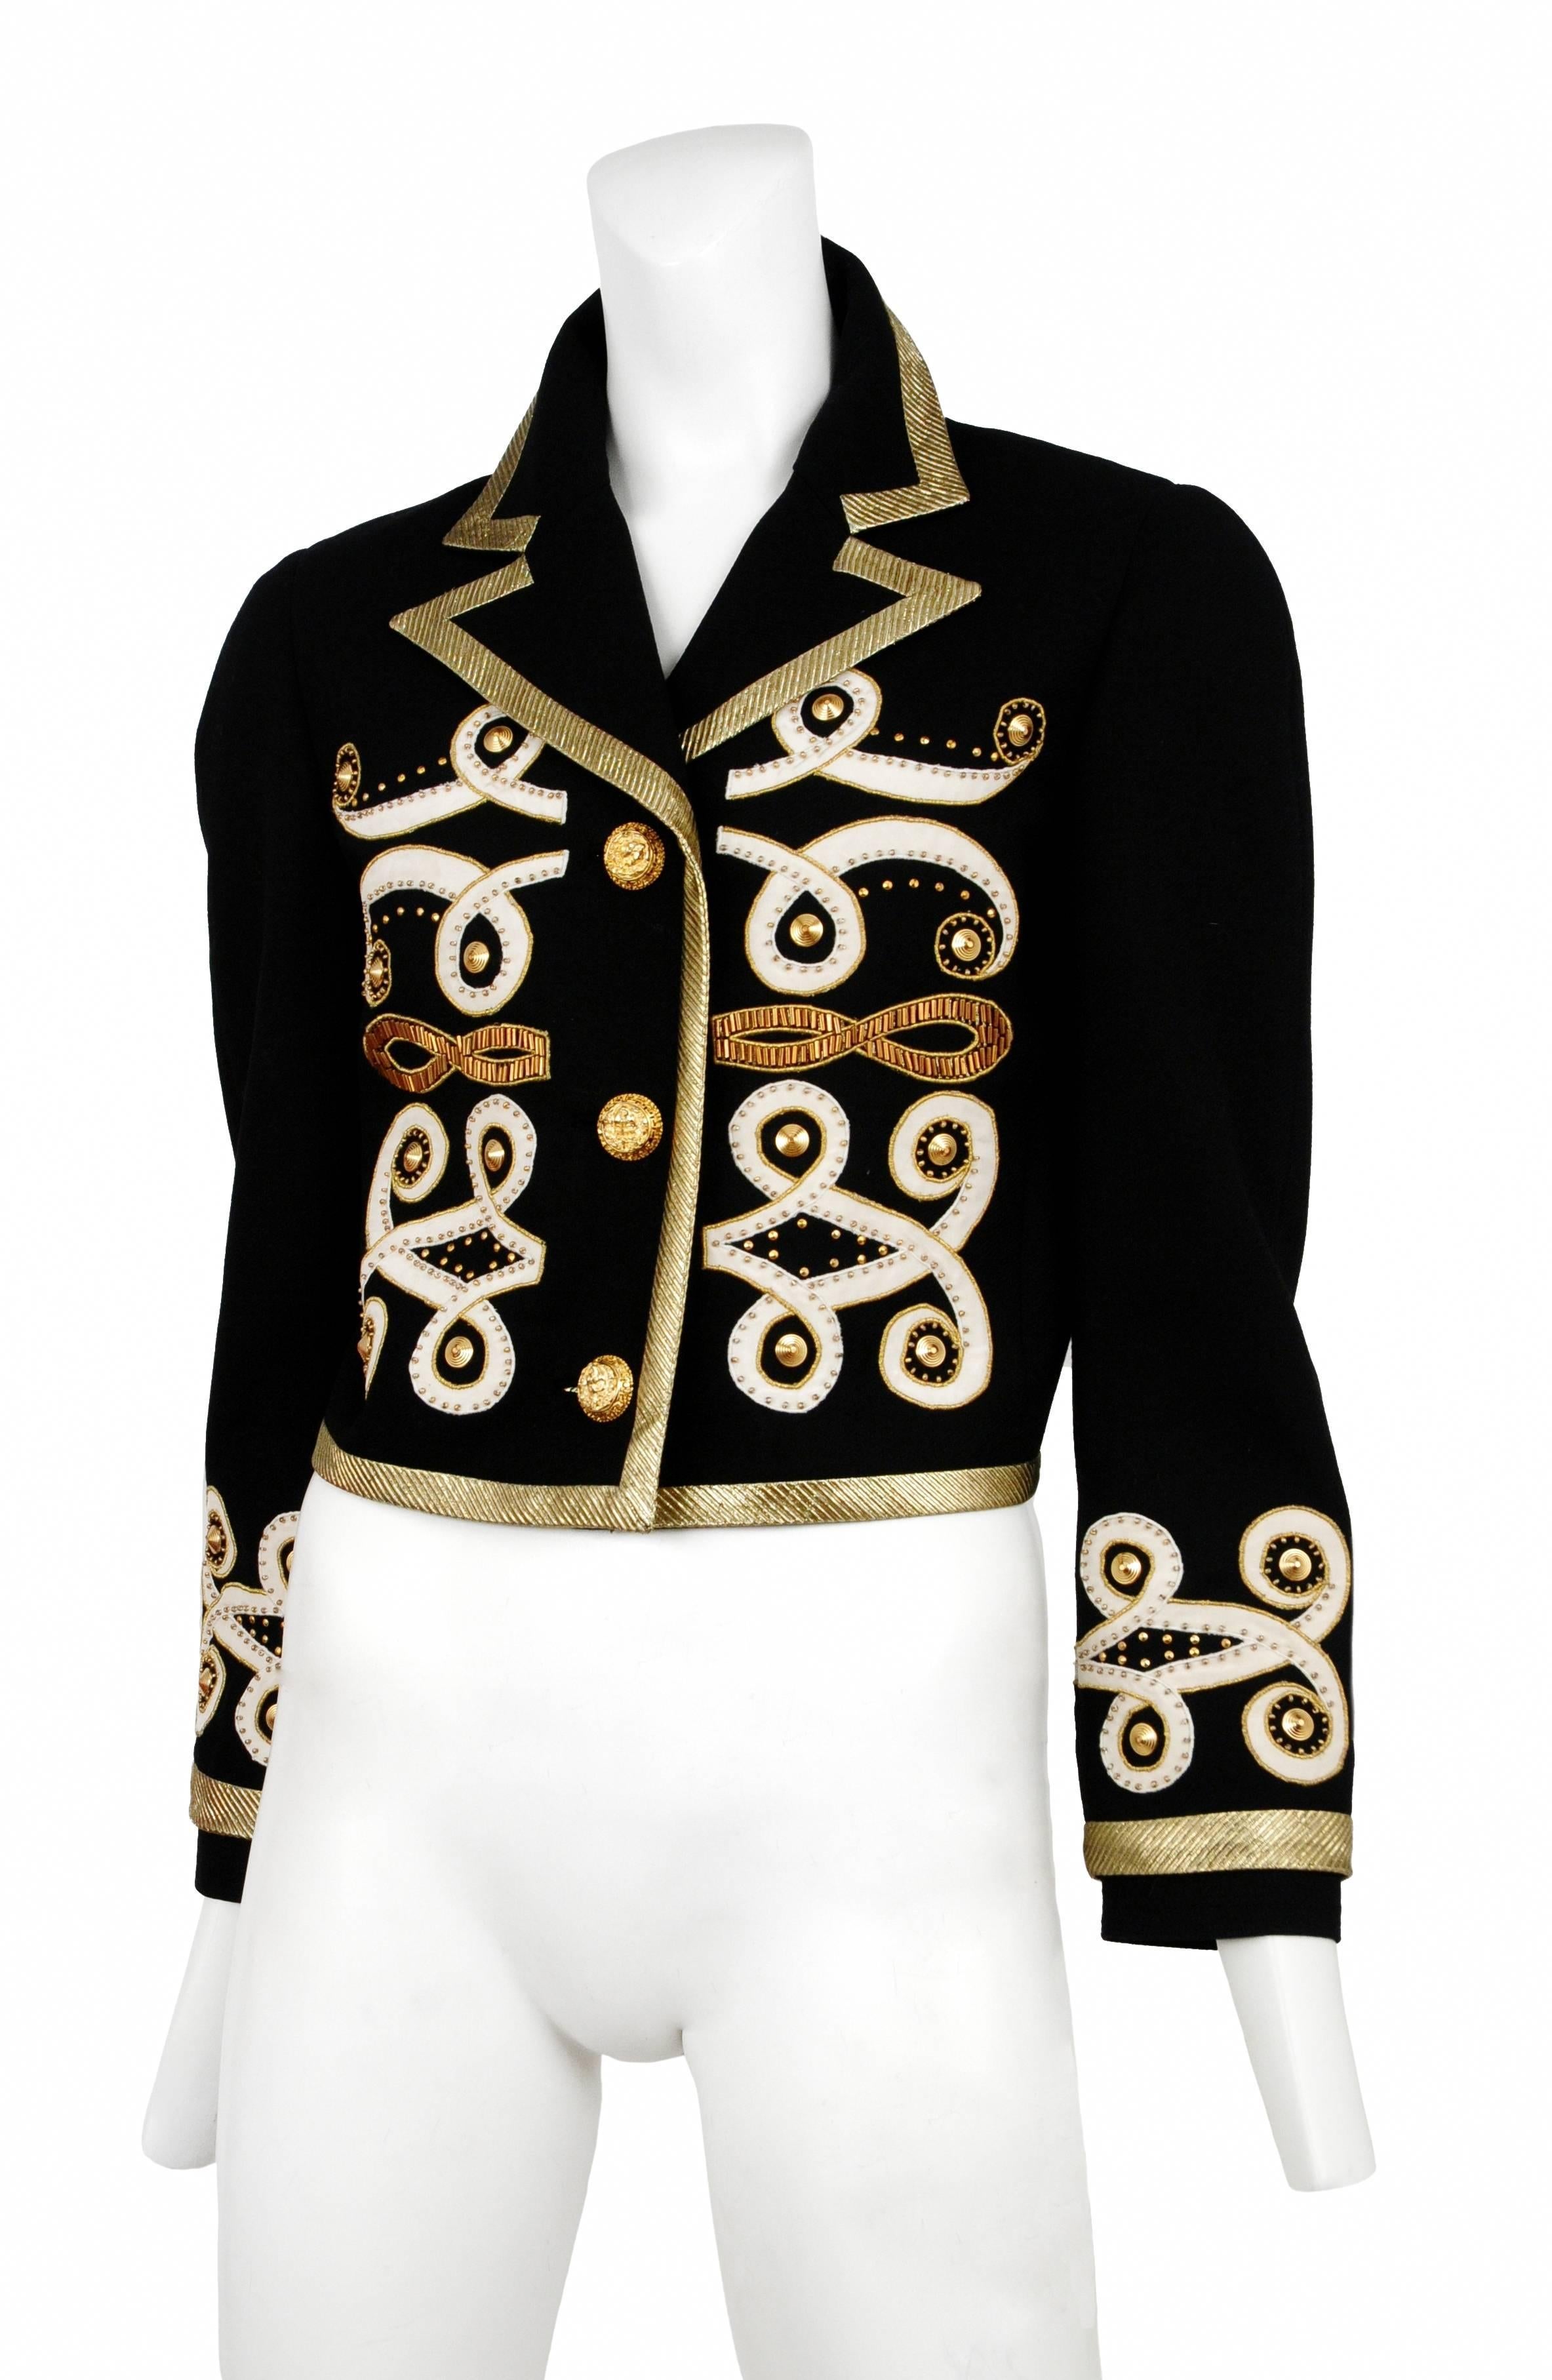 Vintage Gianni Versace black wool jacket has gold fabric trim and applique details with gold Medusa button.
Please inquire for additional images.